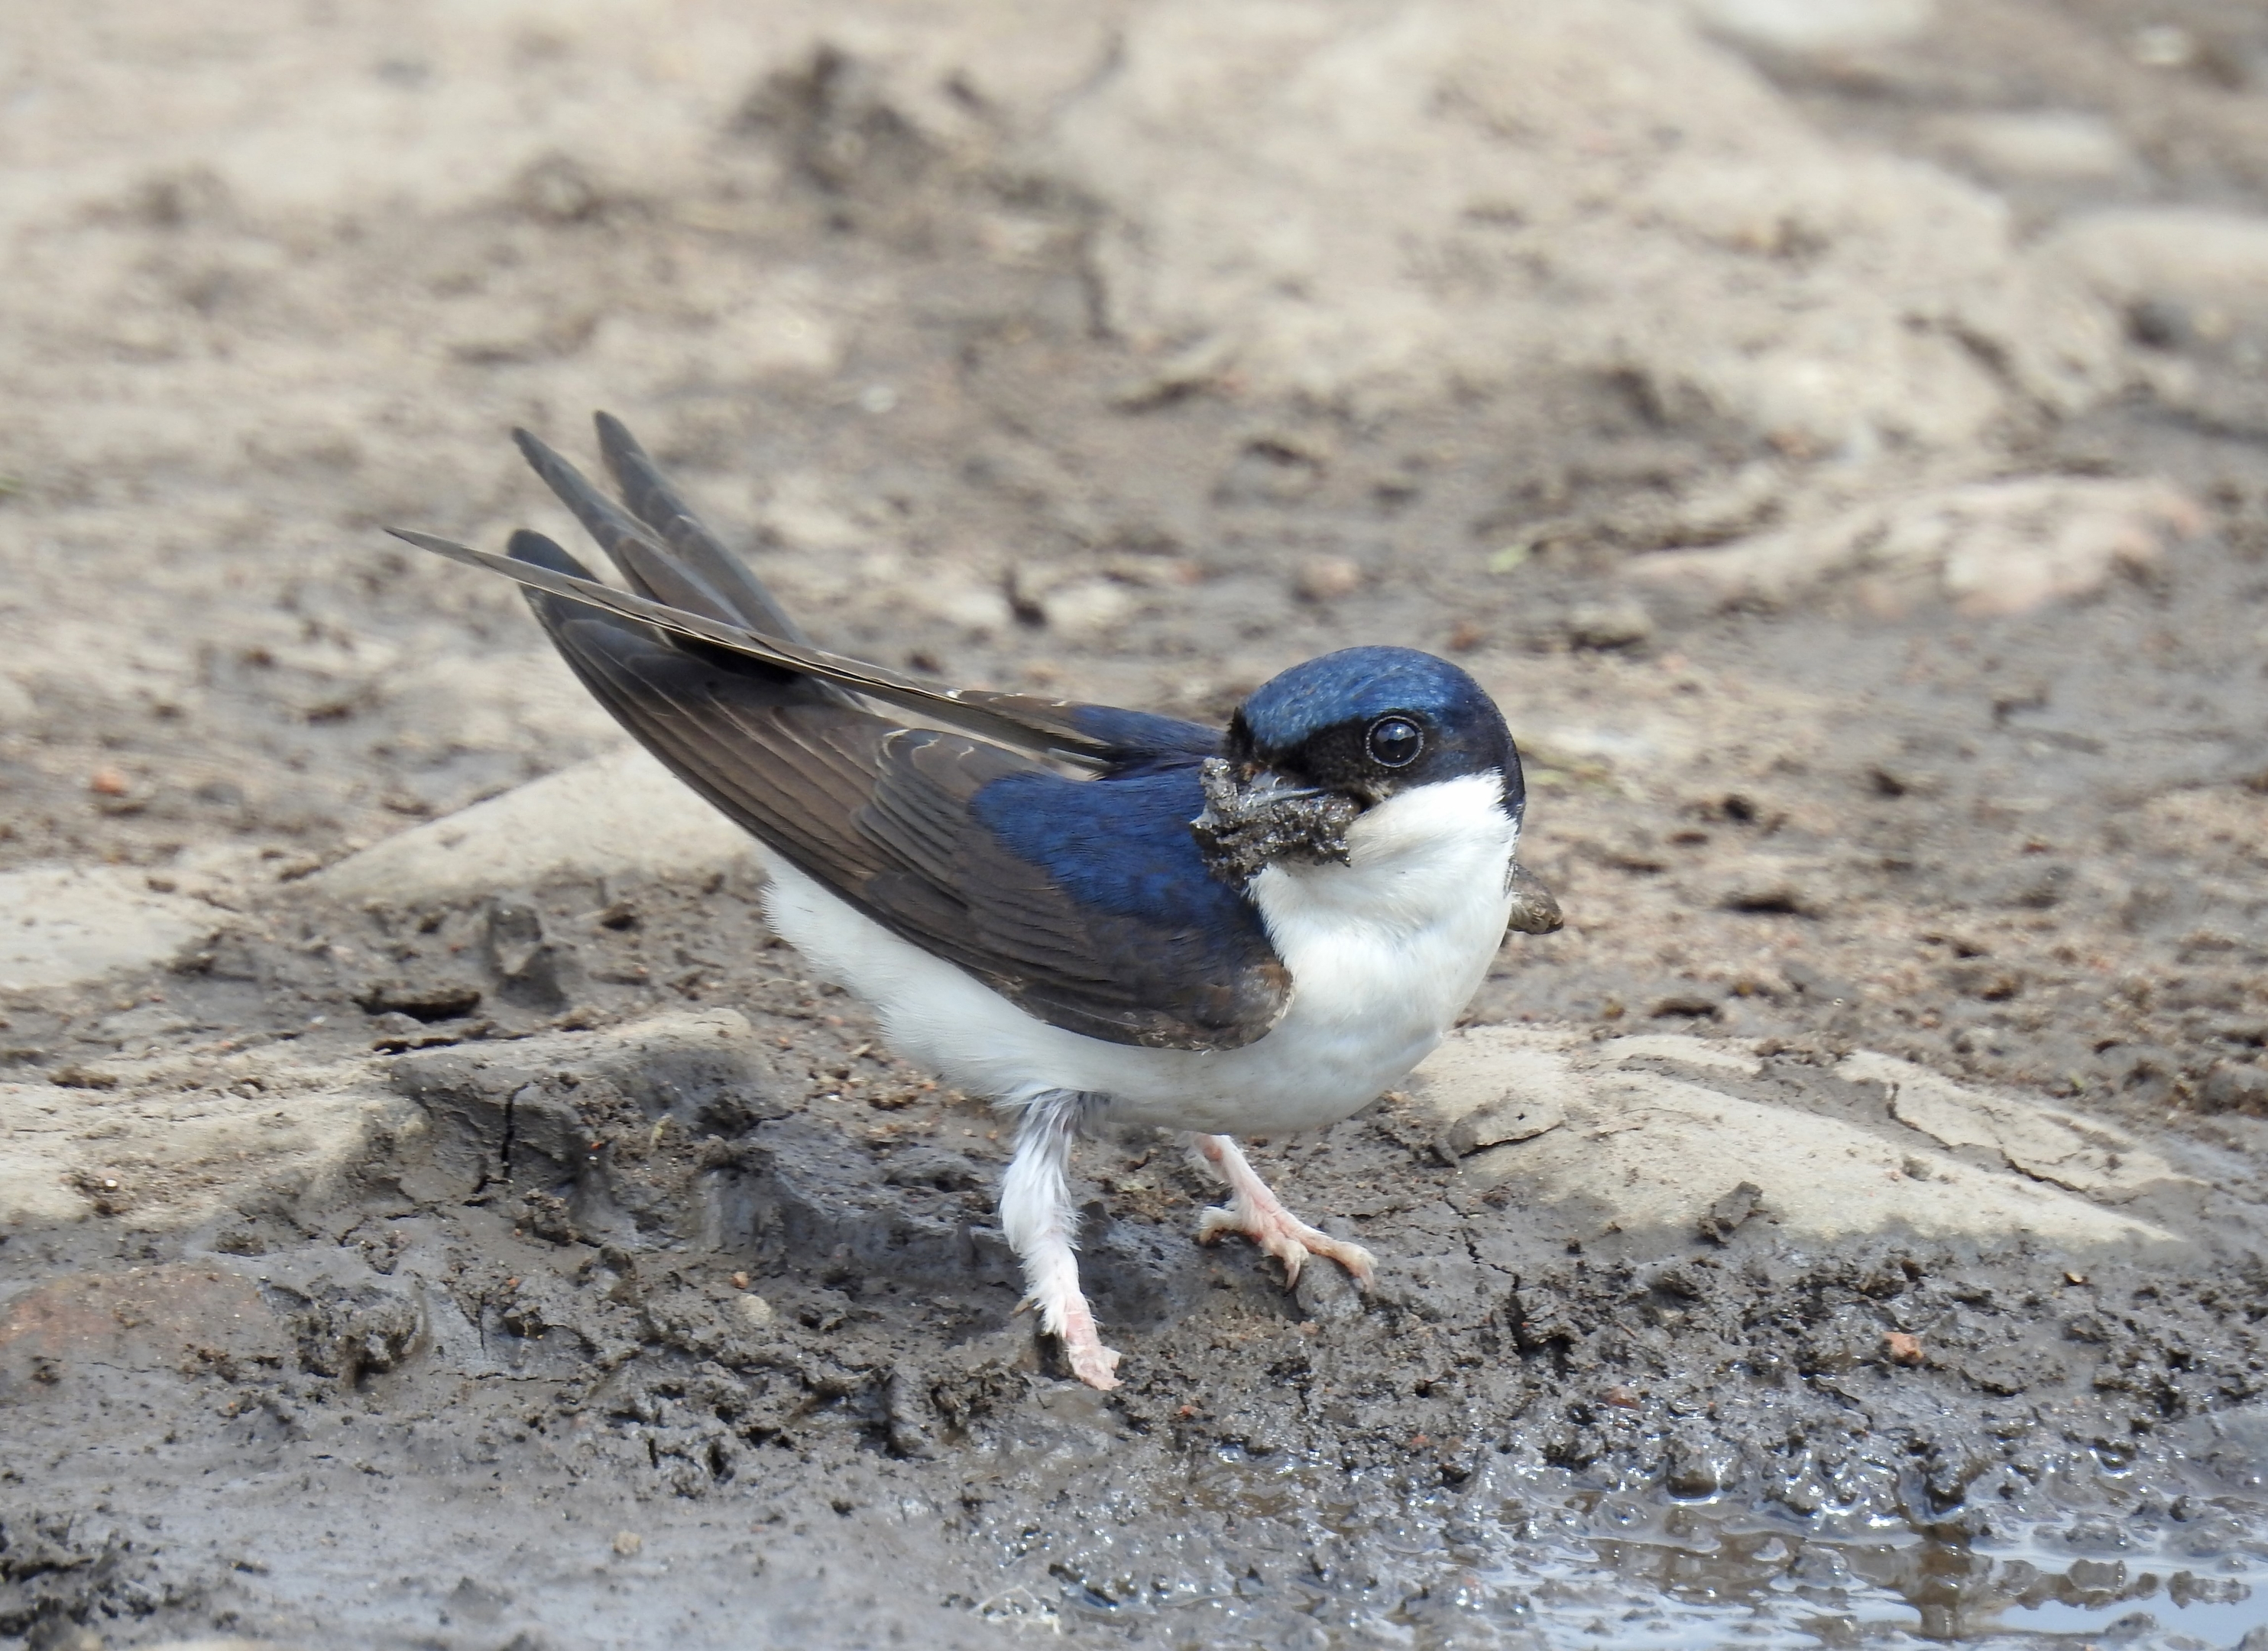 A house martin
gathering mud for
nest building at
Cromarty in the
Black Isle. Picture
courtesy of reader
Sandy Sutherland